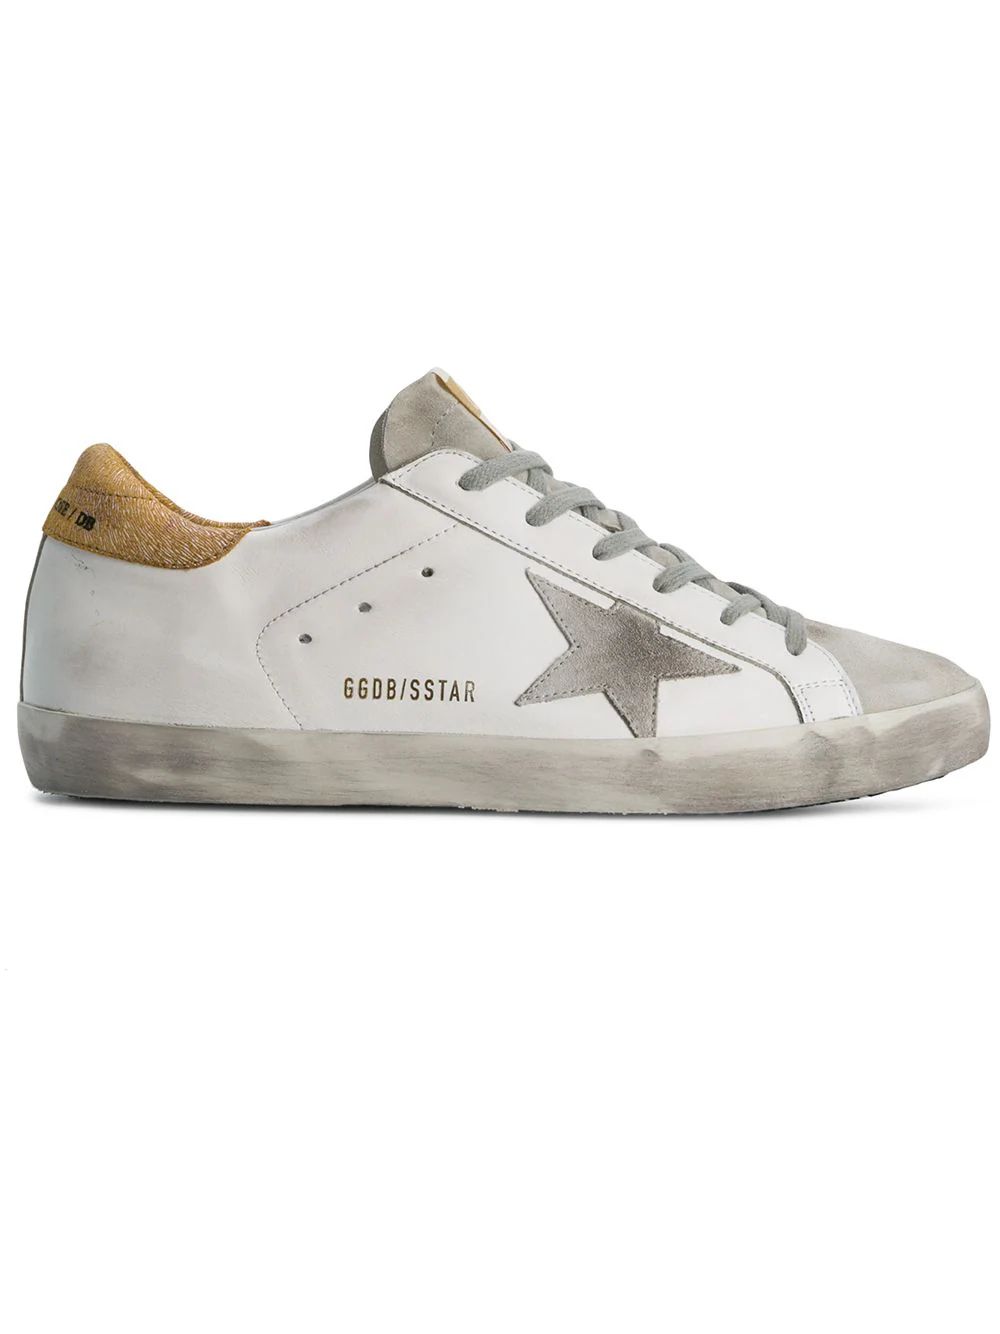 Golden Goose Deluxe Brand Superstar sneakers - White | FarFetch US